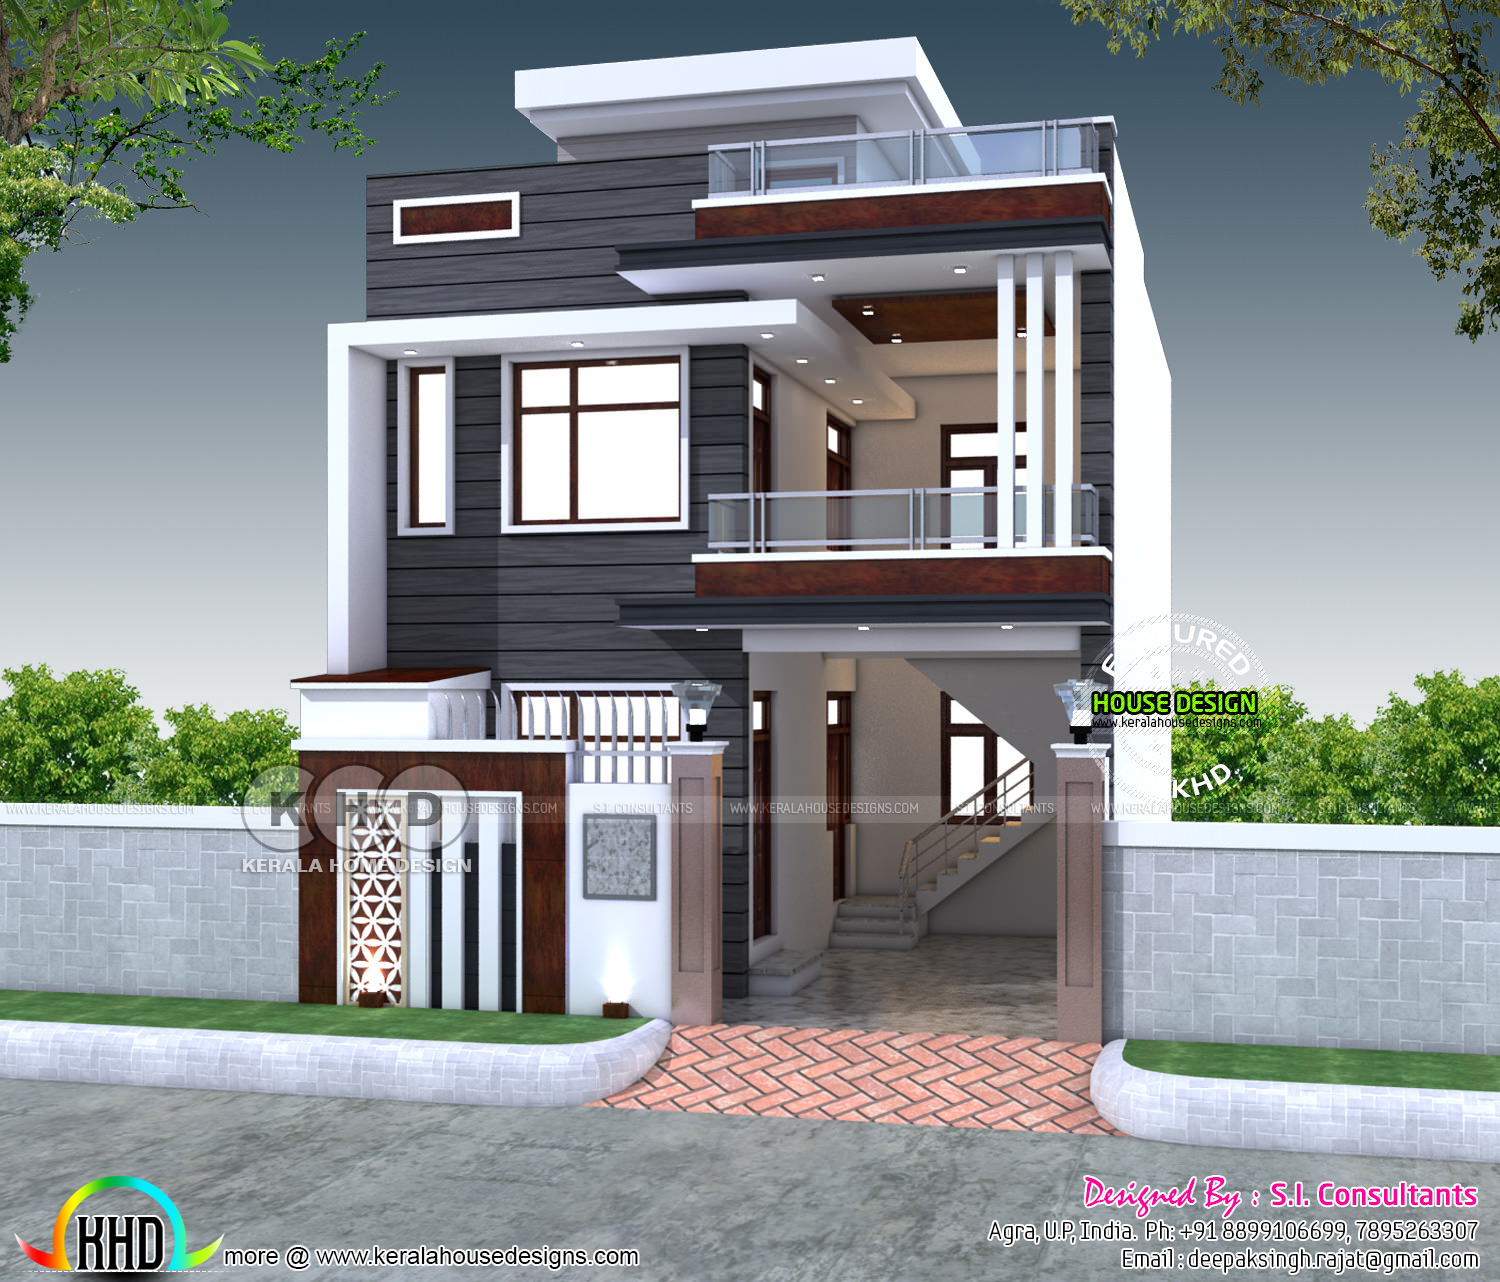 2200 sq ft 4  bedroom  India  house  plan  modern style Kerala home  design  and floor plans  8000 